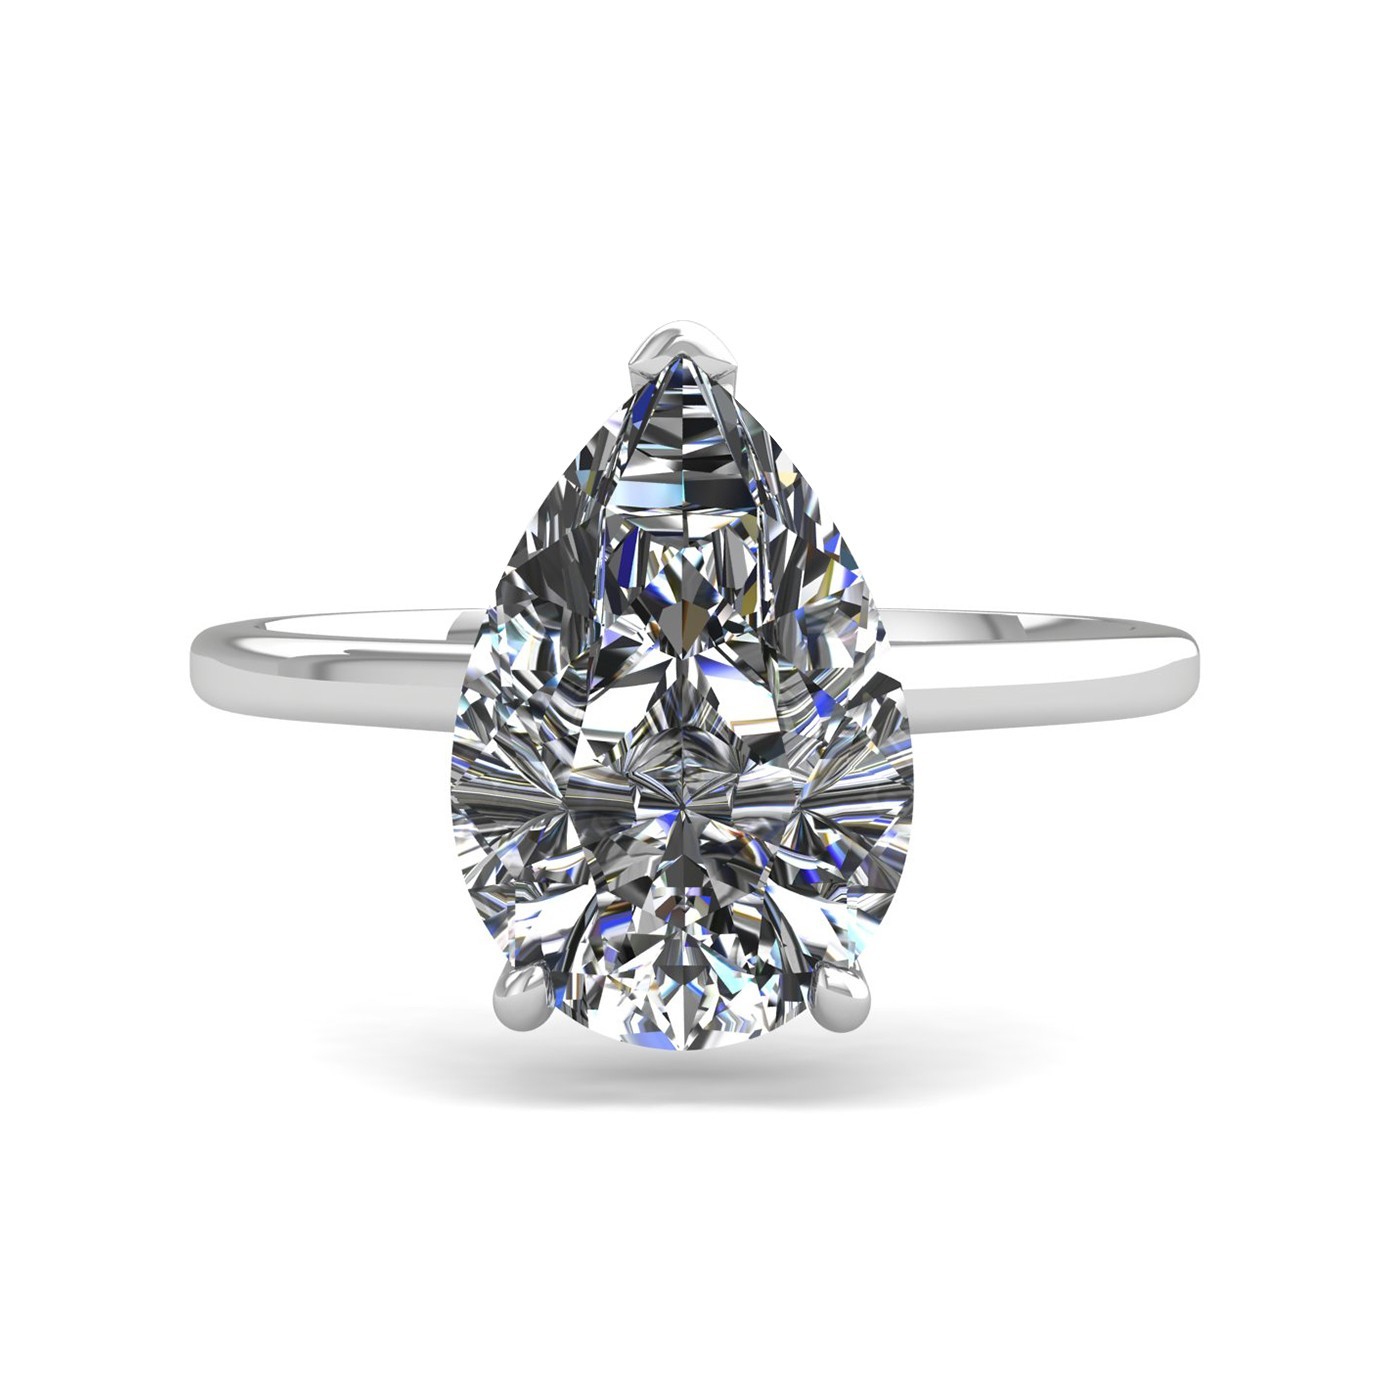 18k white gold  1,50 ct 3 prongs solitaire pear cut diamond engagement ring with whisper thin band Photos & images